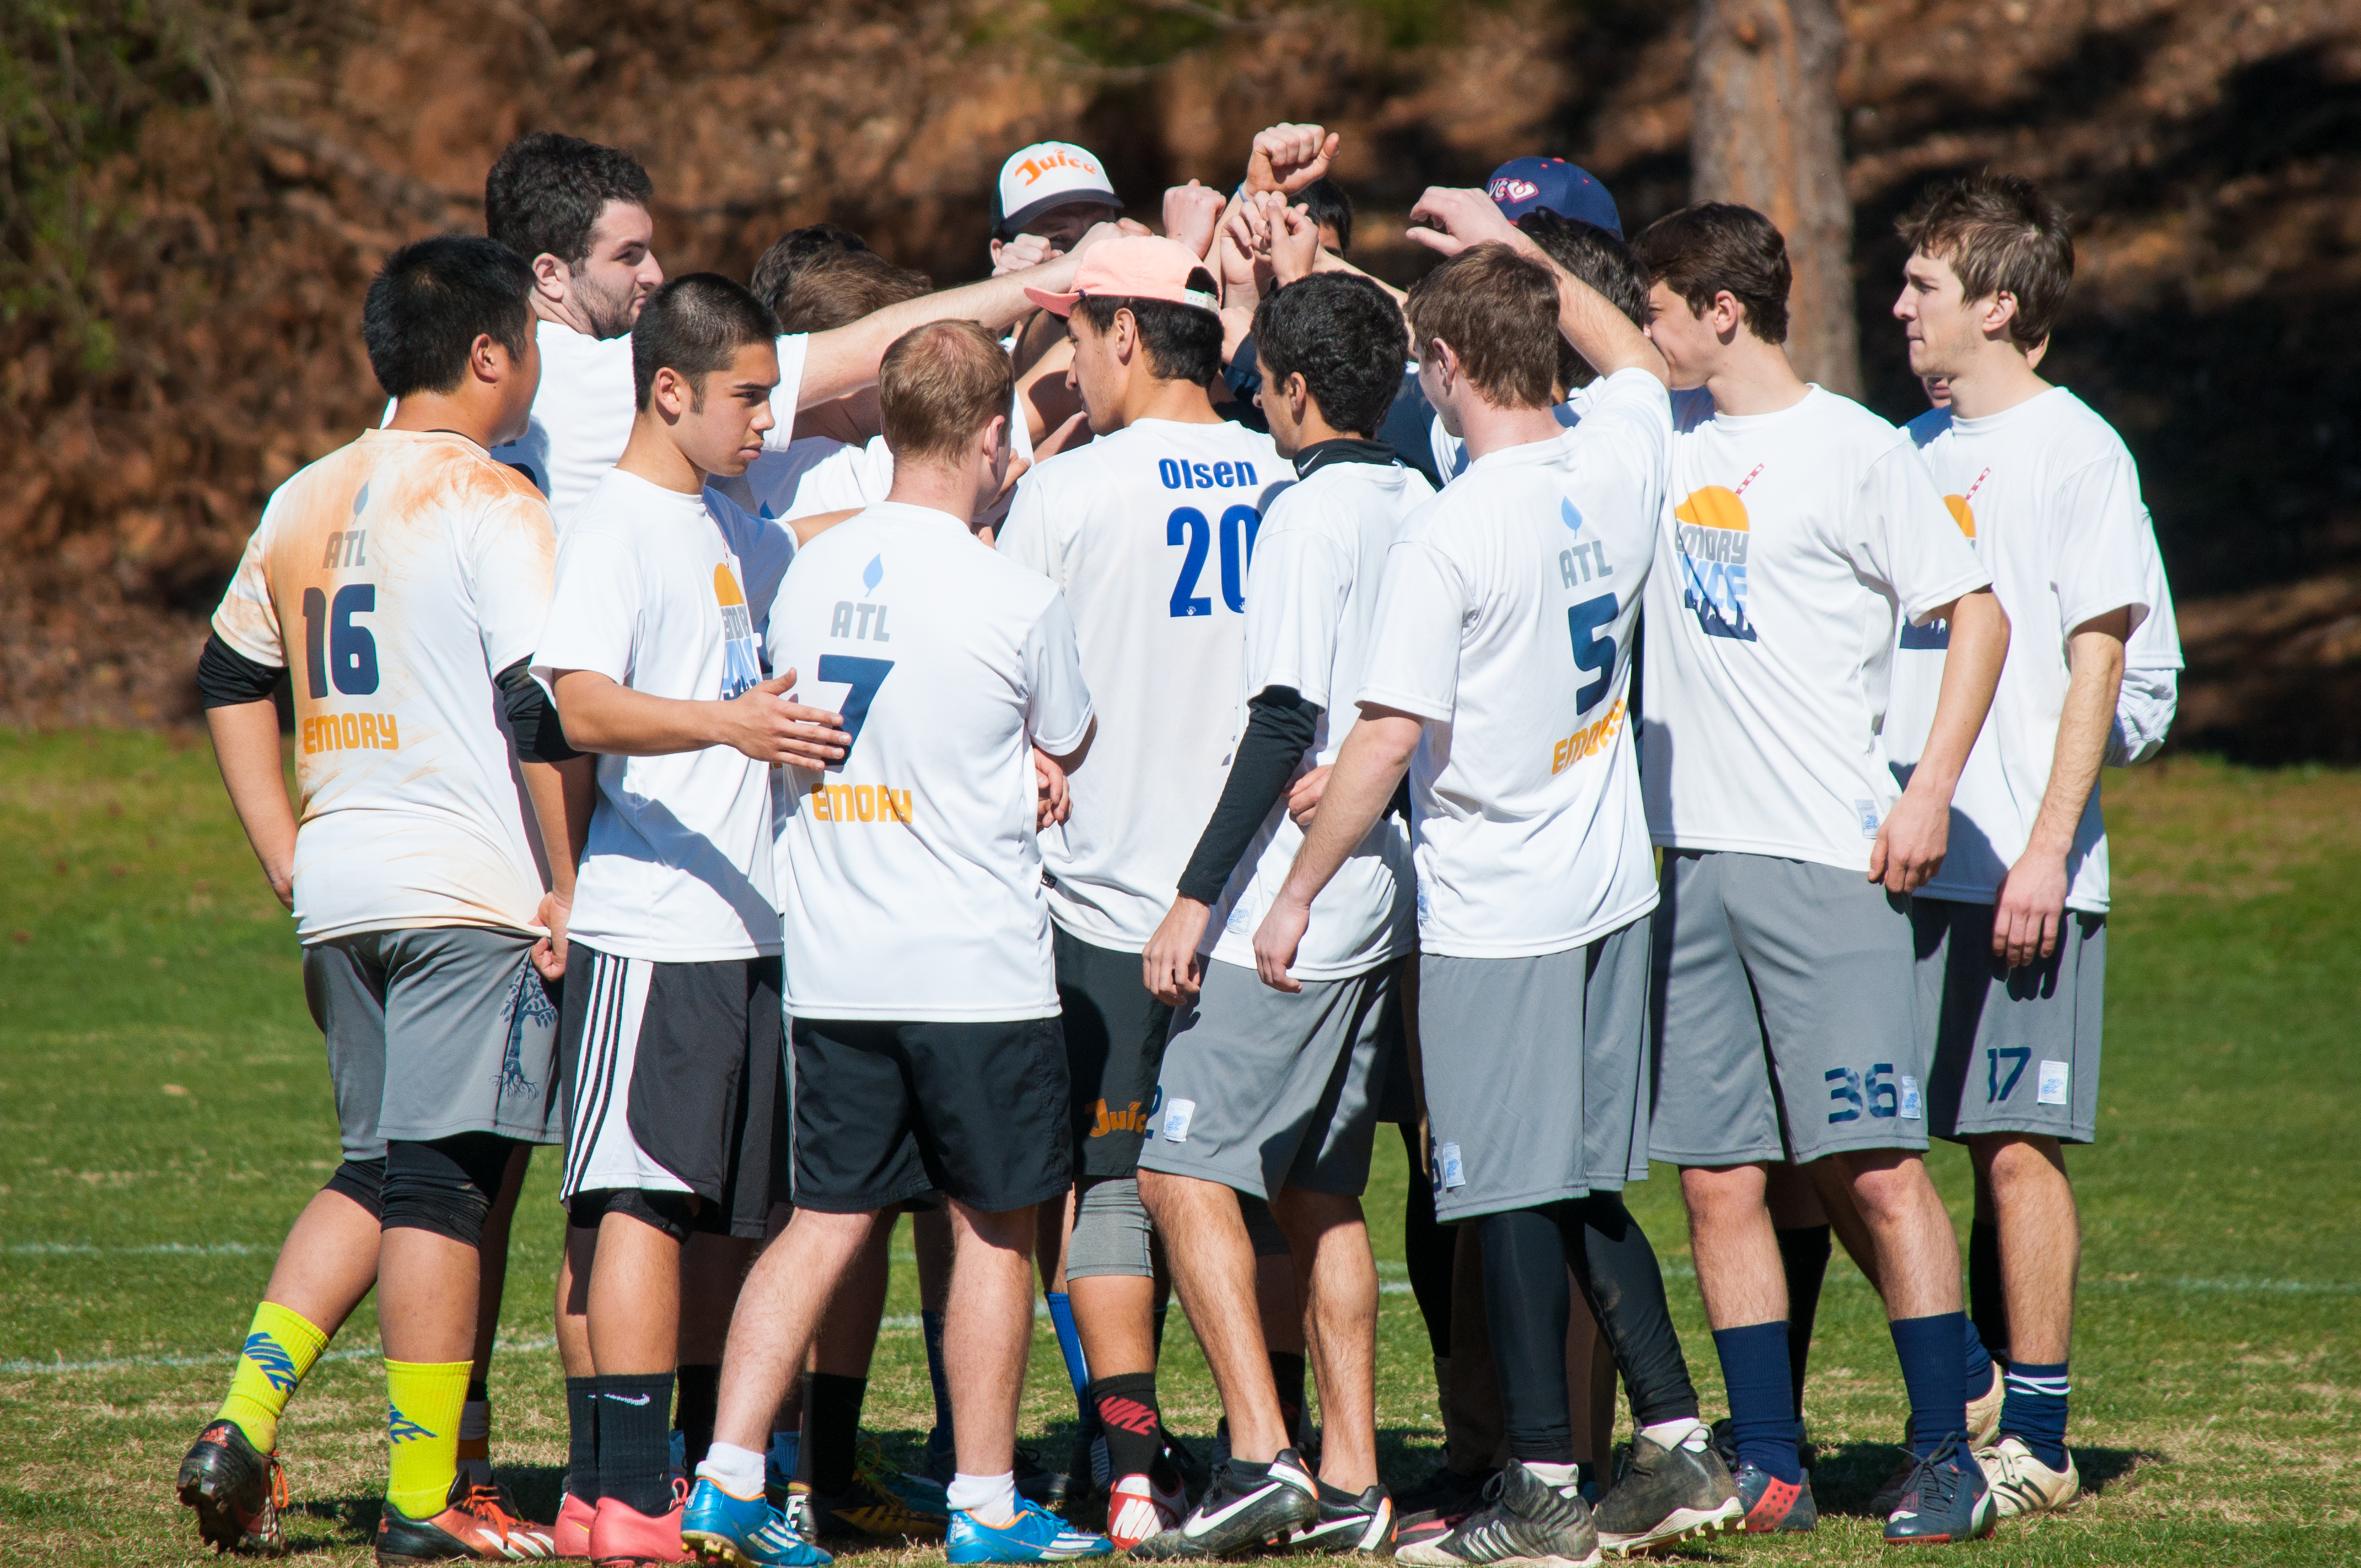 Emory Athletic Teams Face Novel Challenges Without Fall Season